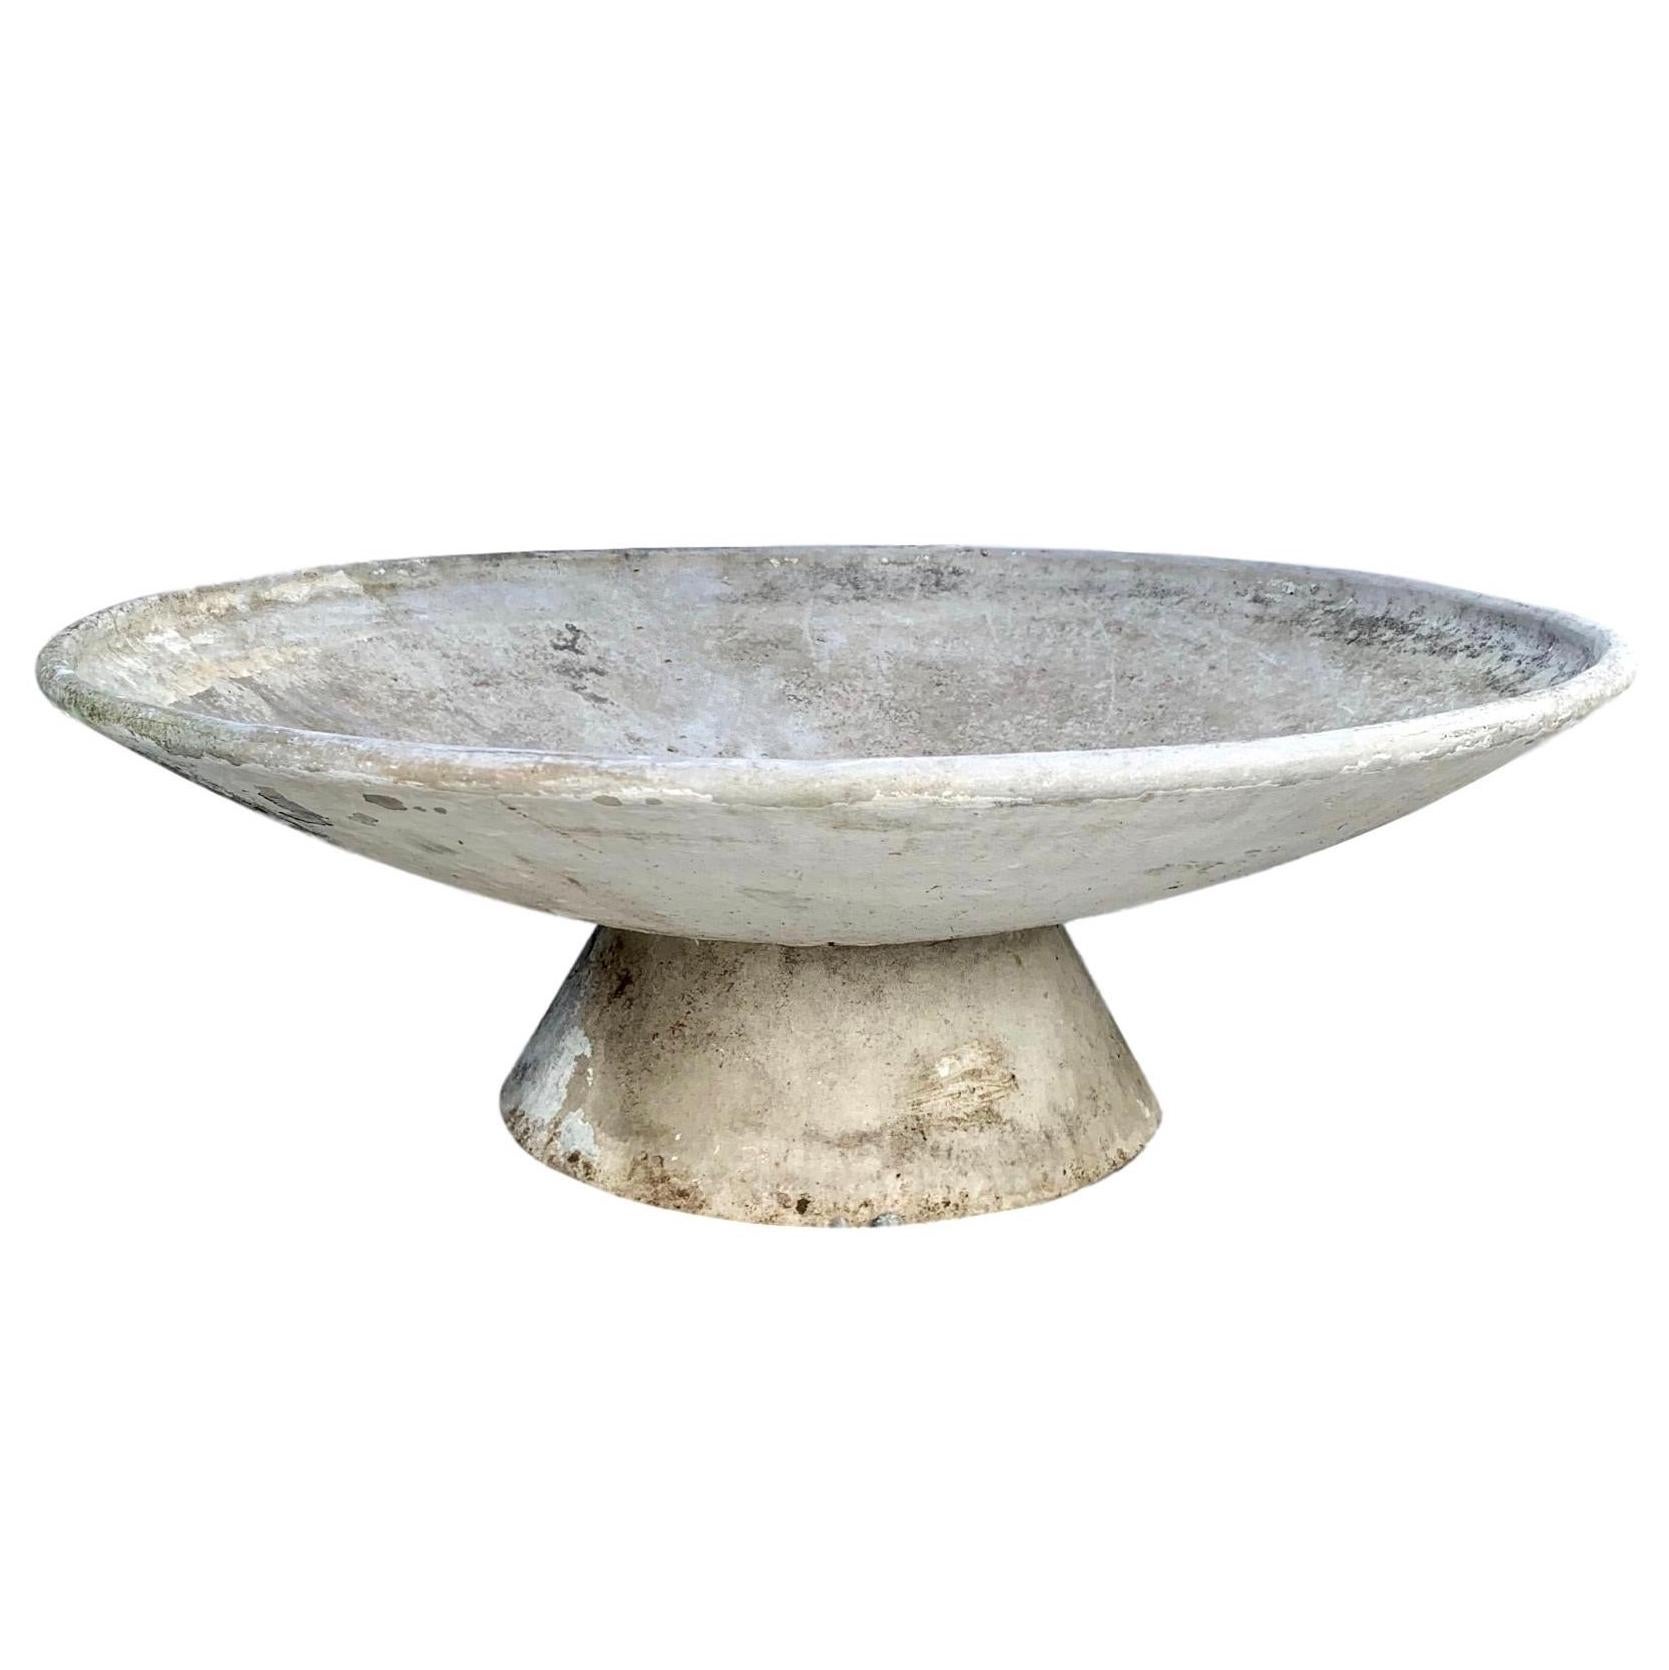 Monumental Willy Guhl 59" Adjustable Two-Piece Concrete Bowl Planters